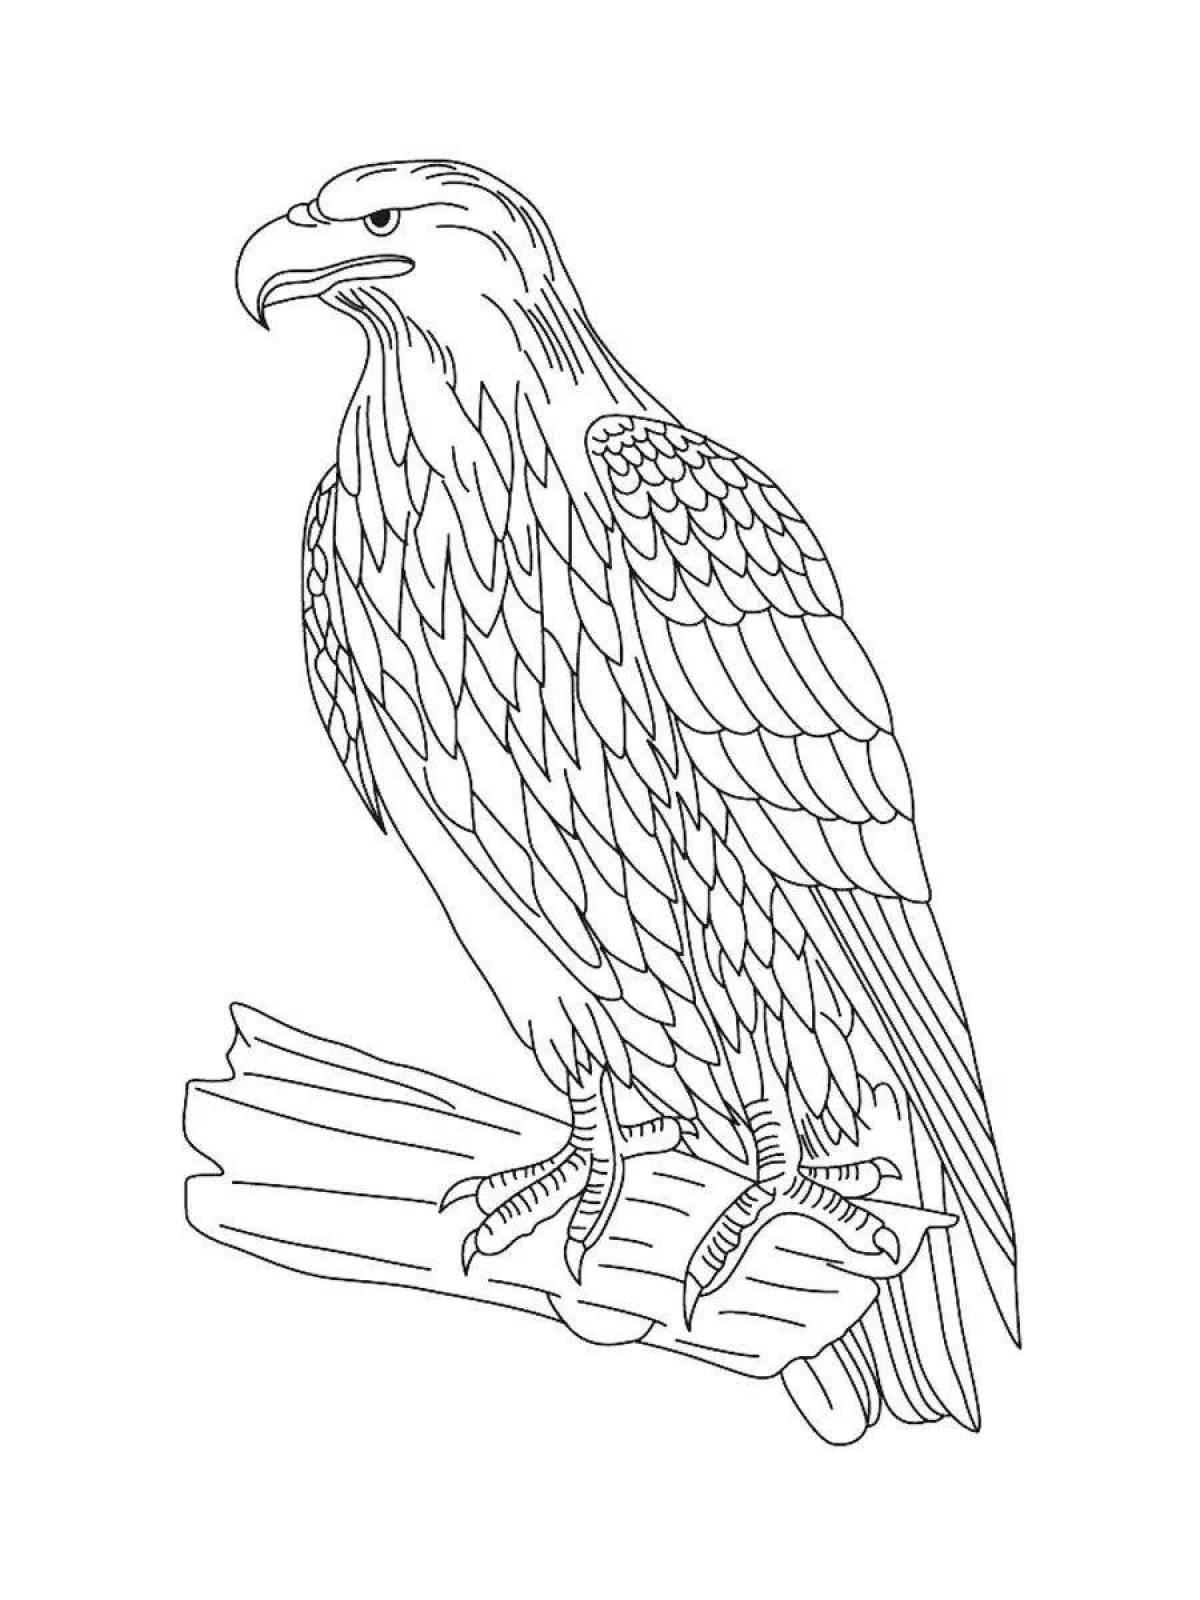 Coloring book richly colored white-tailed eagle